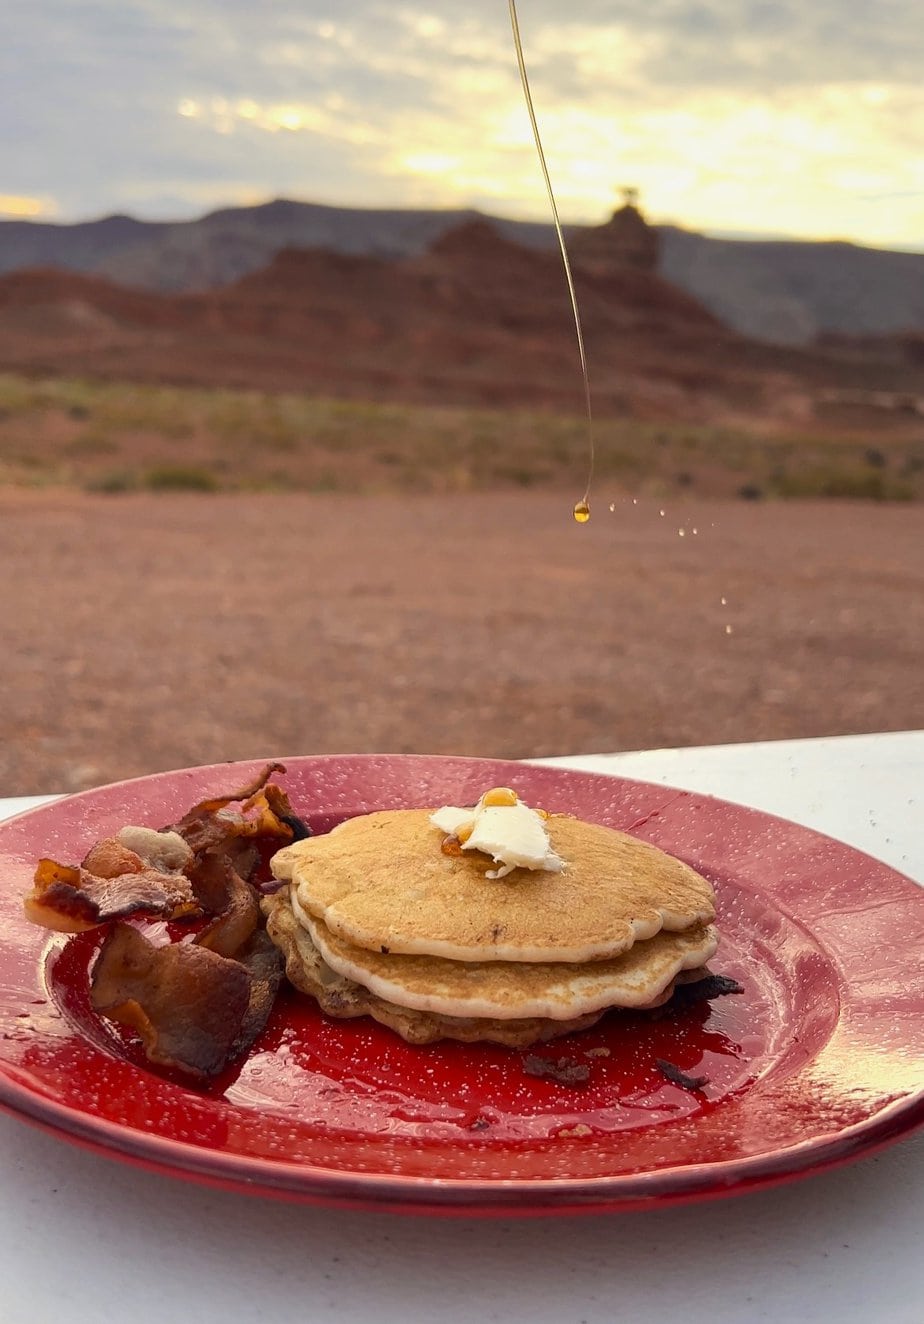 Pancake and Bacon with Butter on a Red Plate with Nature in the Background